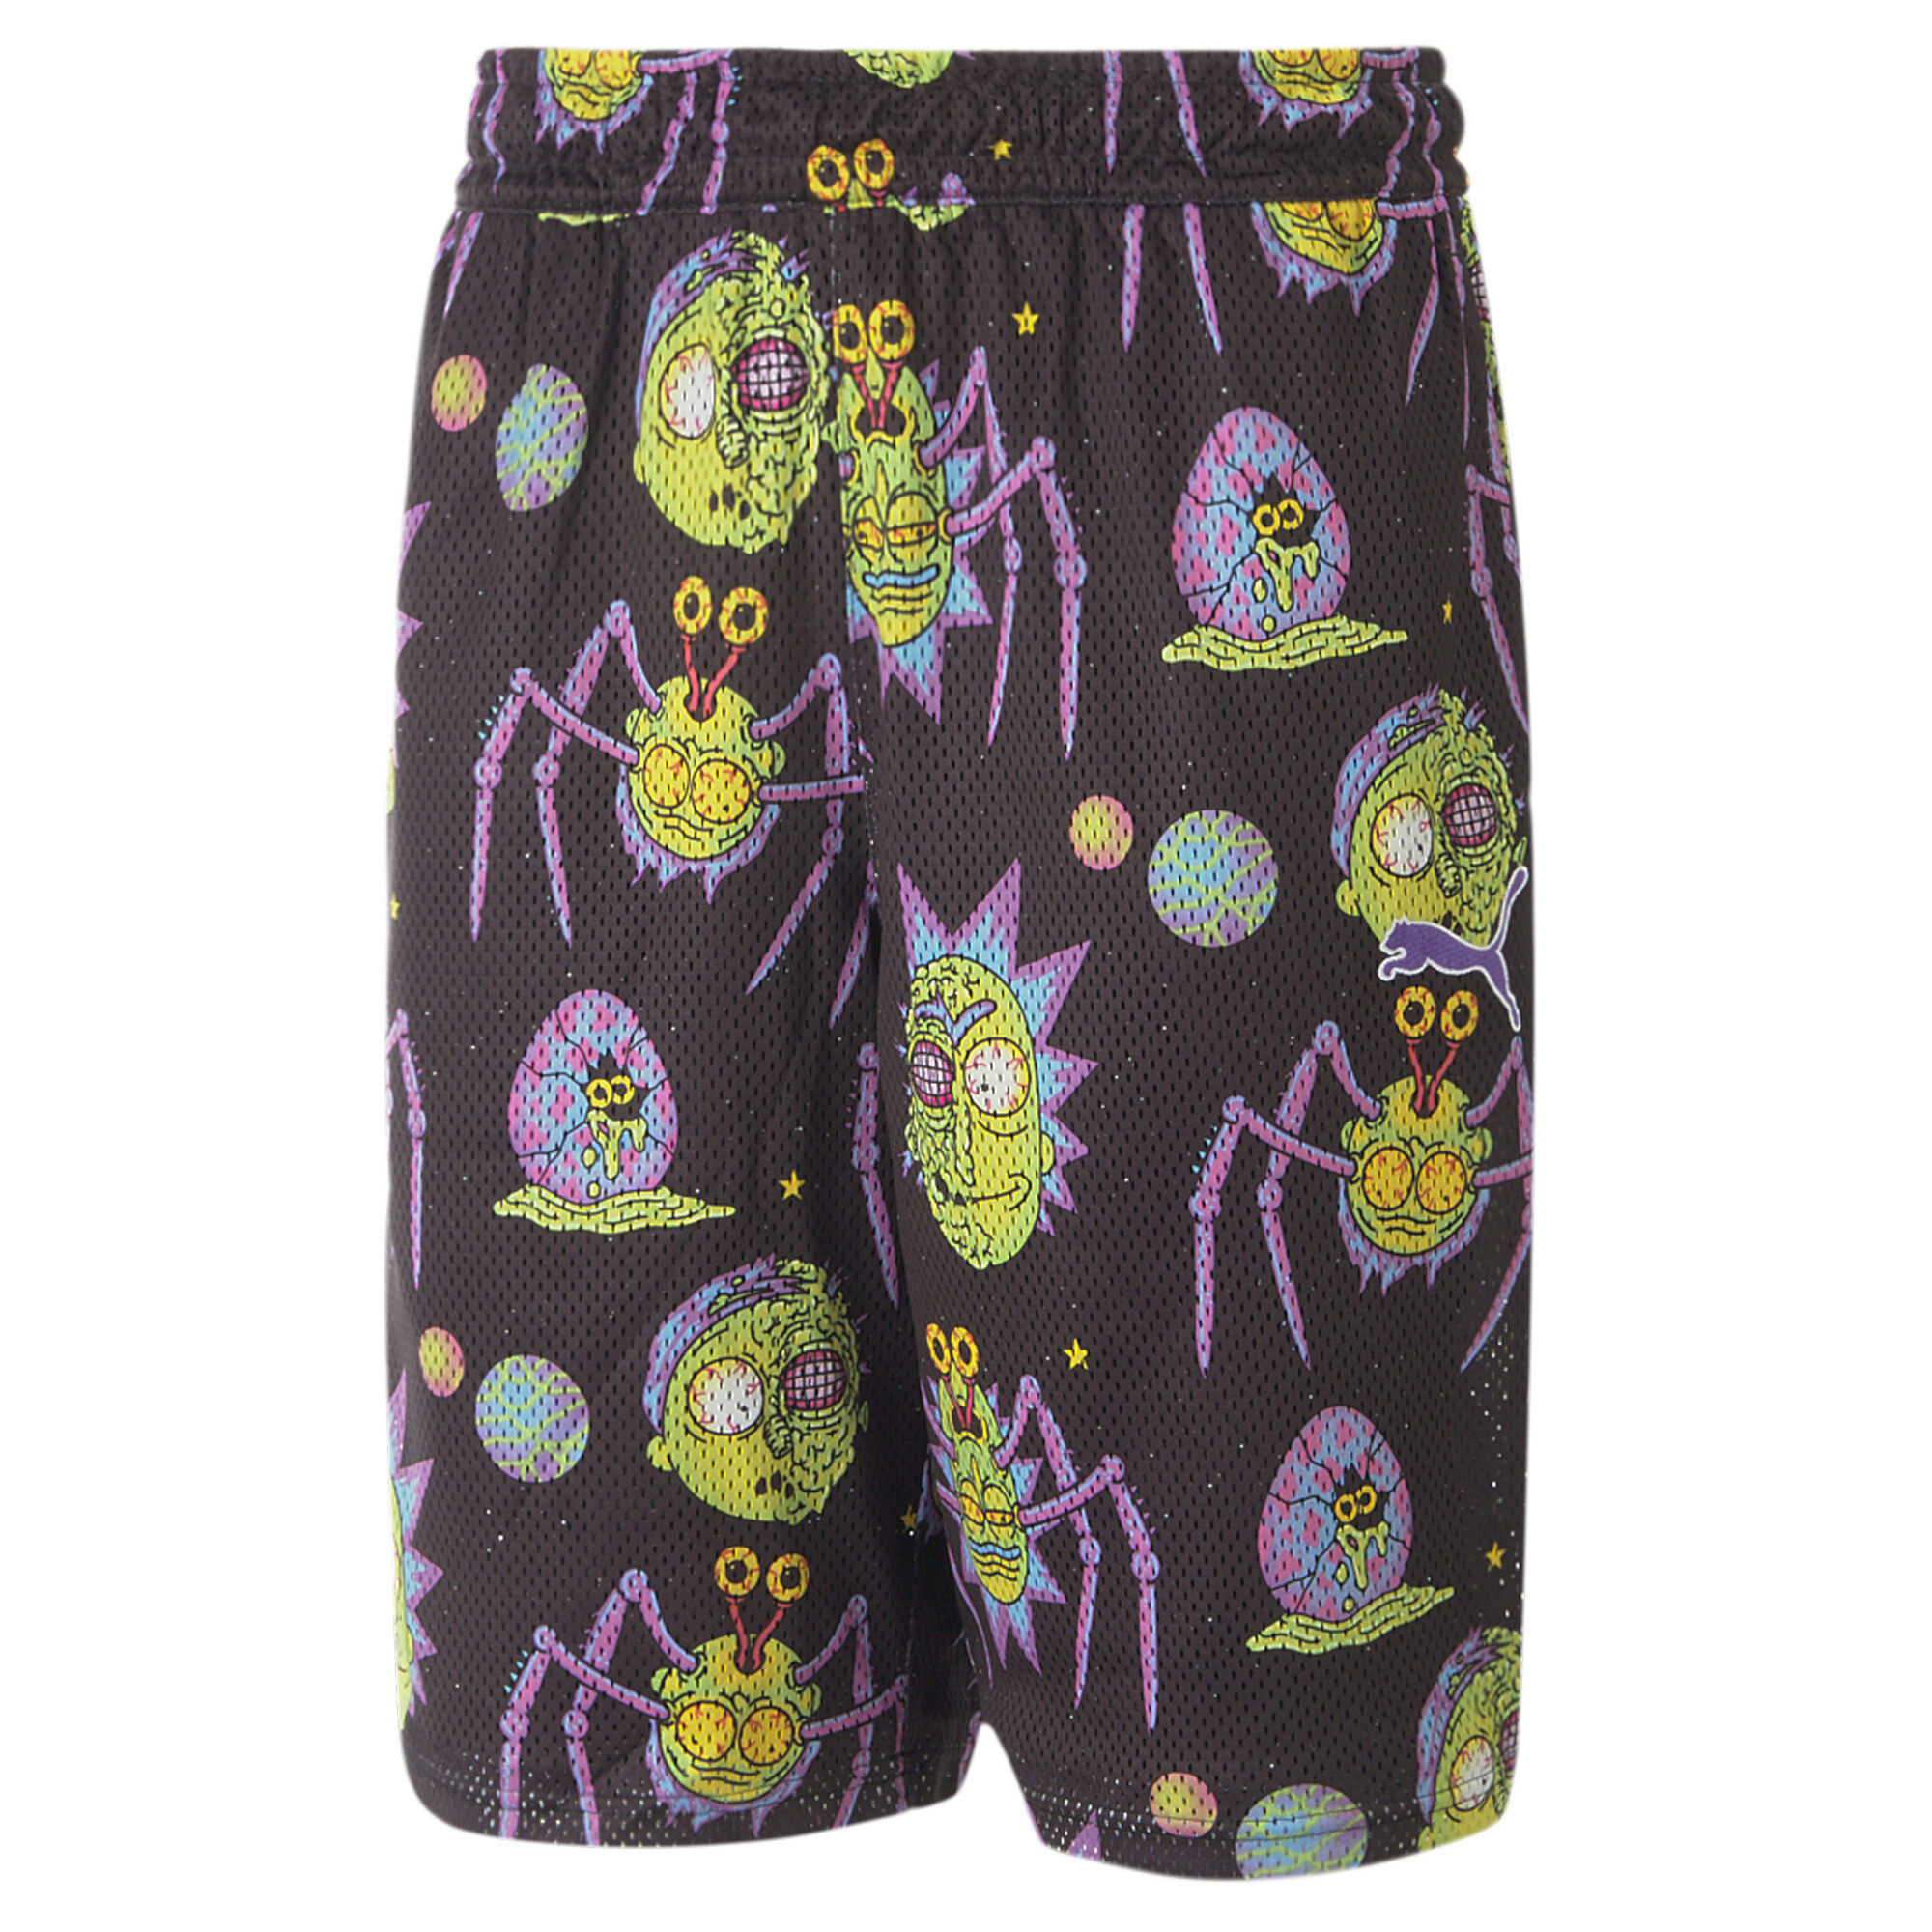 Men's PUMA X RICK AND MORTY Printed Basketball Shorts Men In Black, Size XS